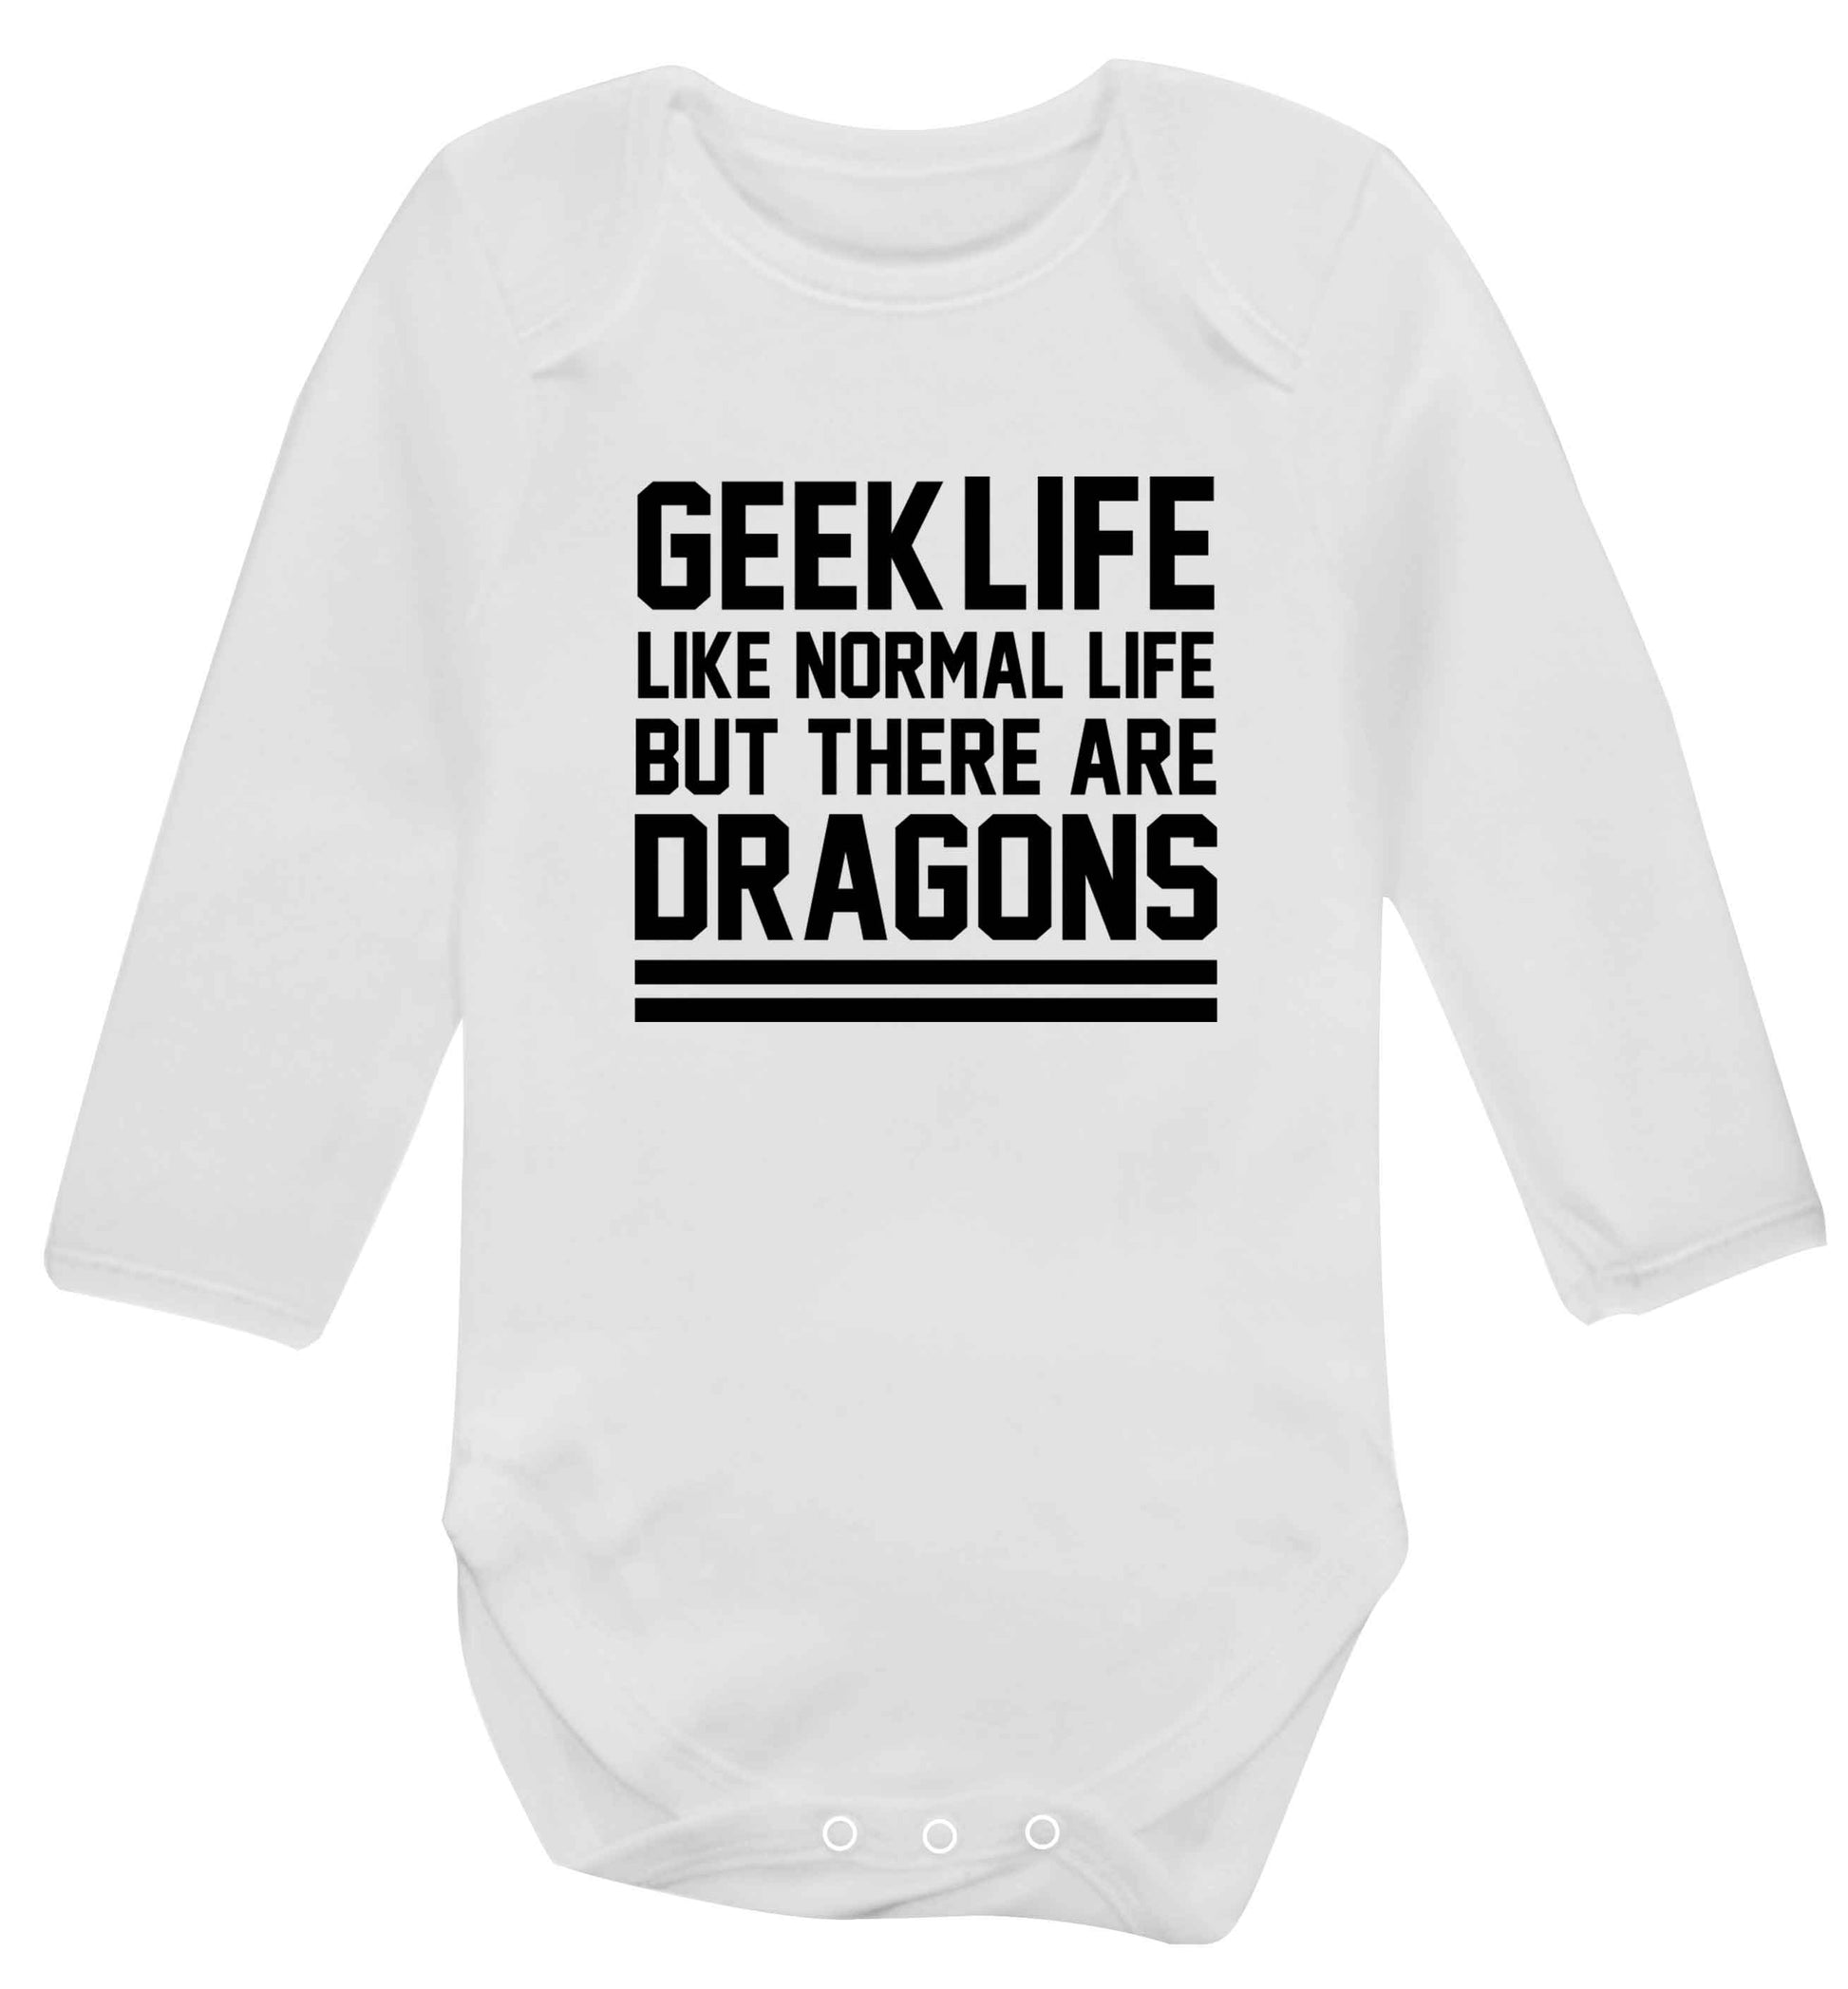 Geek life like normal life but there are dragons baby vest long sleeved white 6-12 months